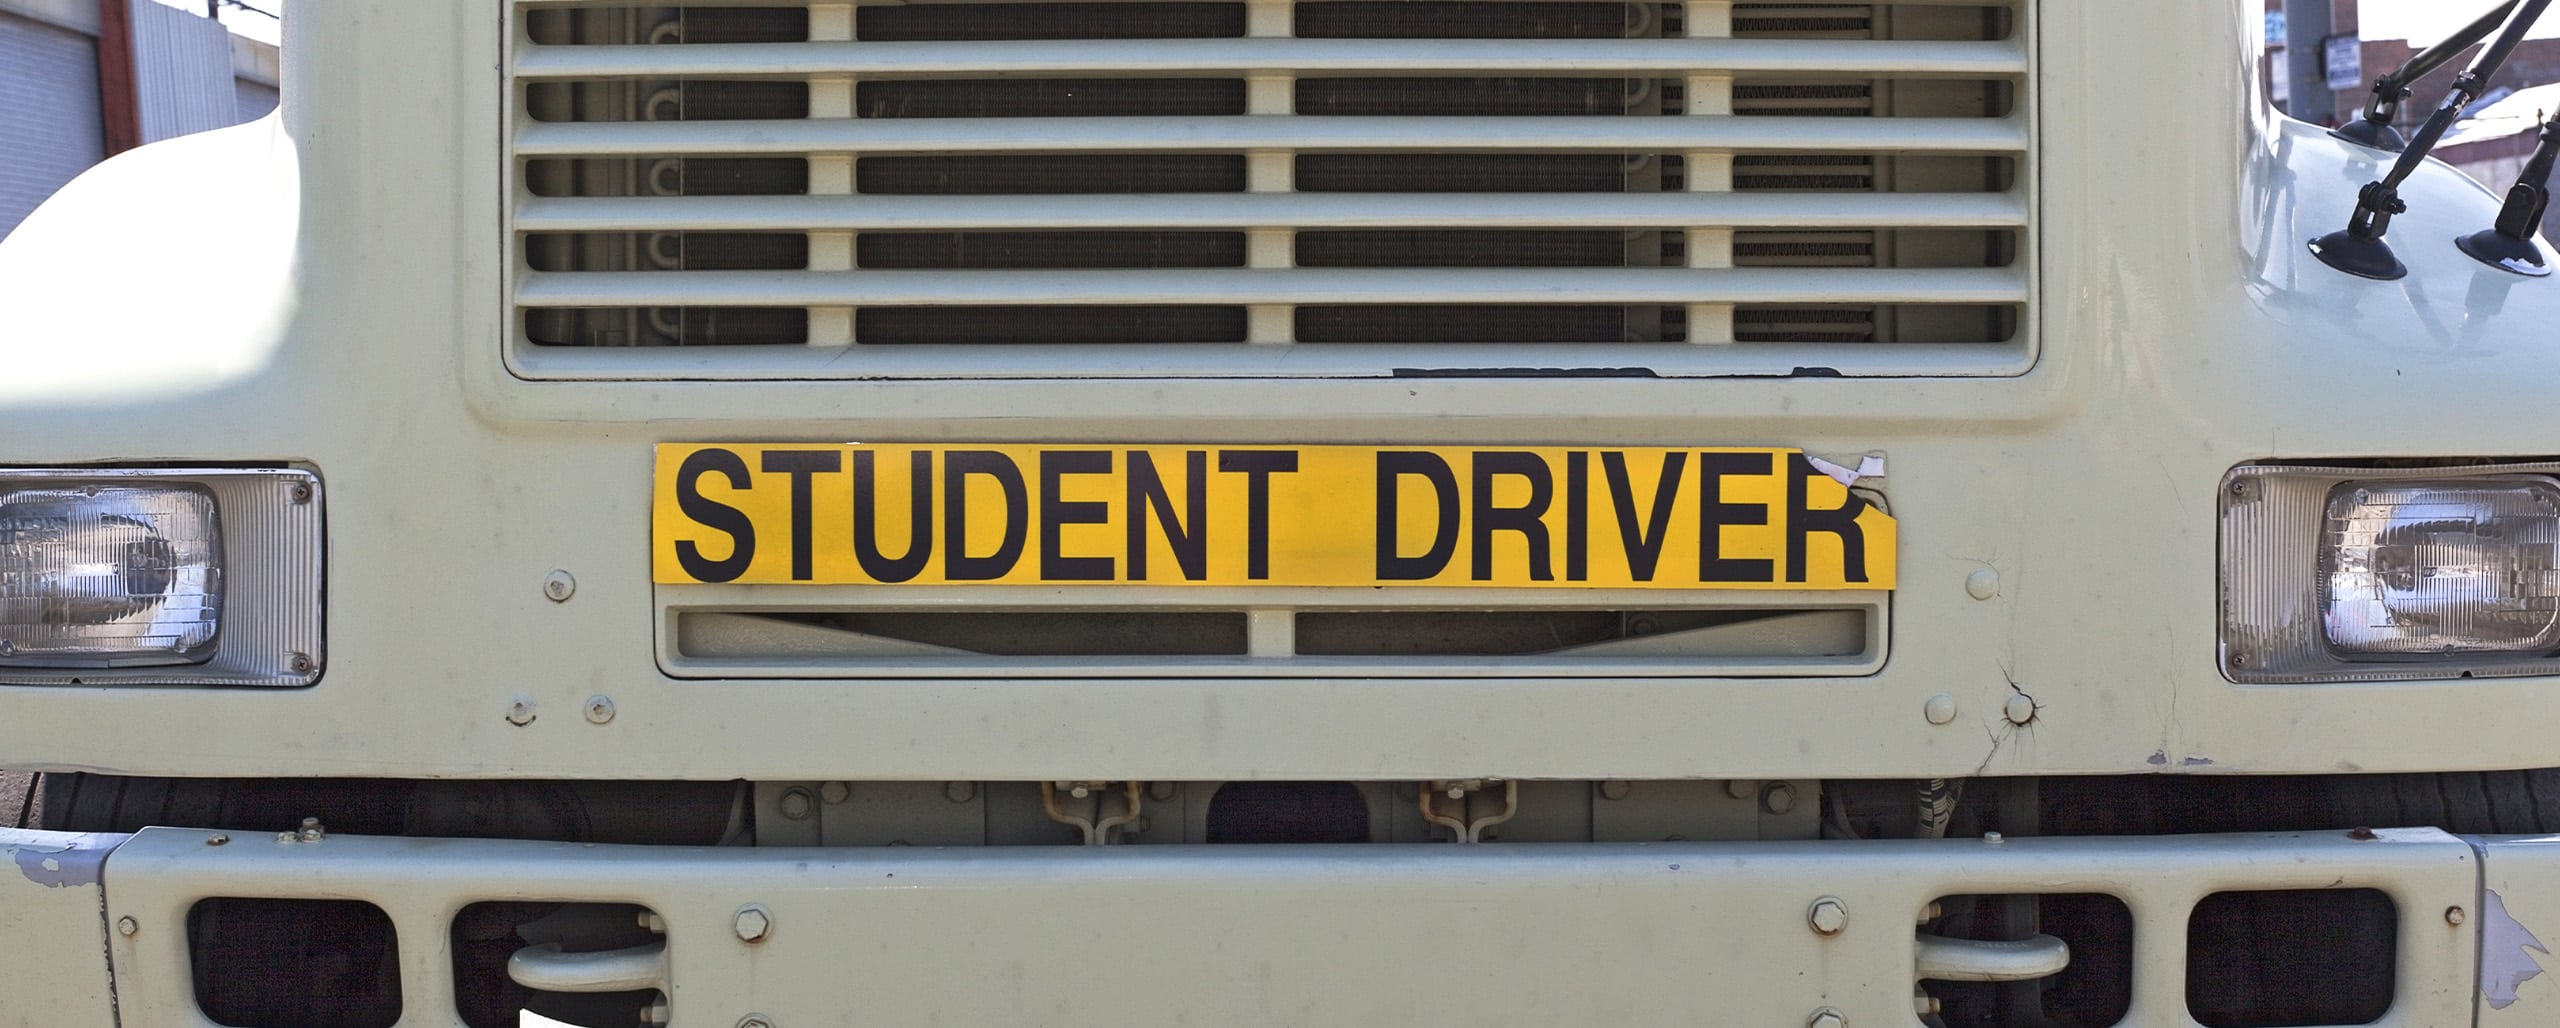 Semi Truck with Student Driver sticker on front grill